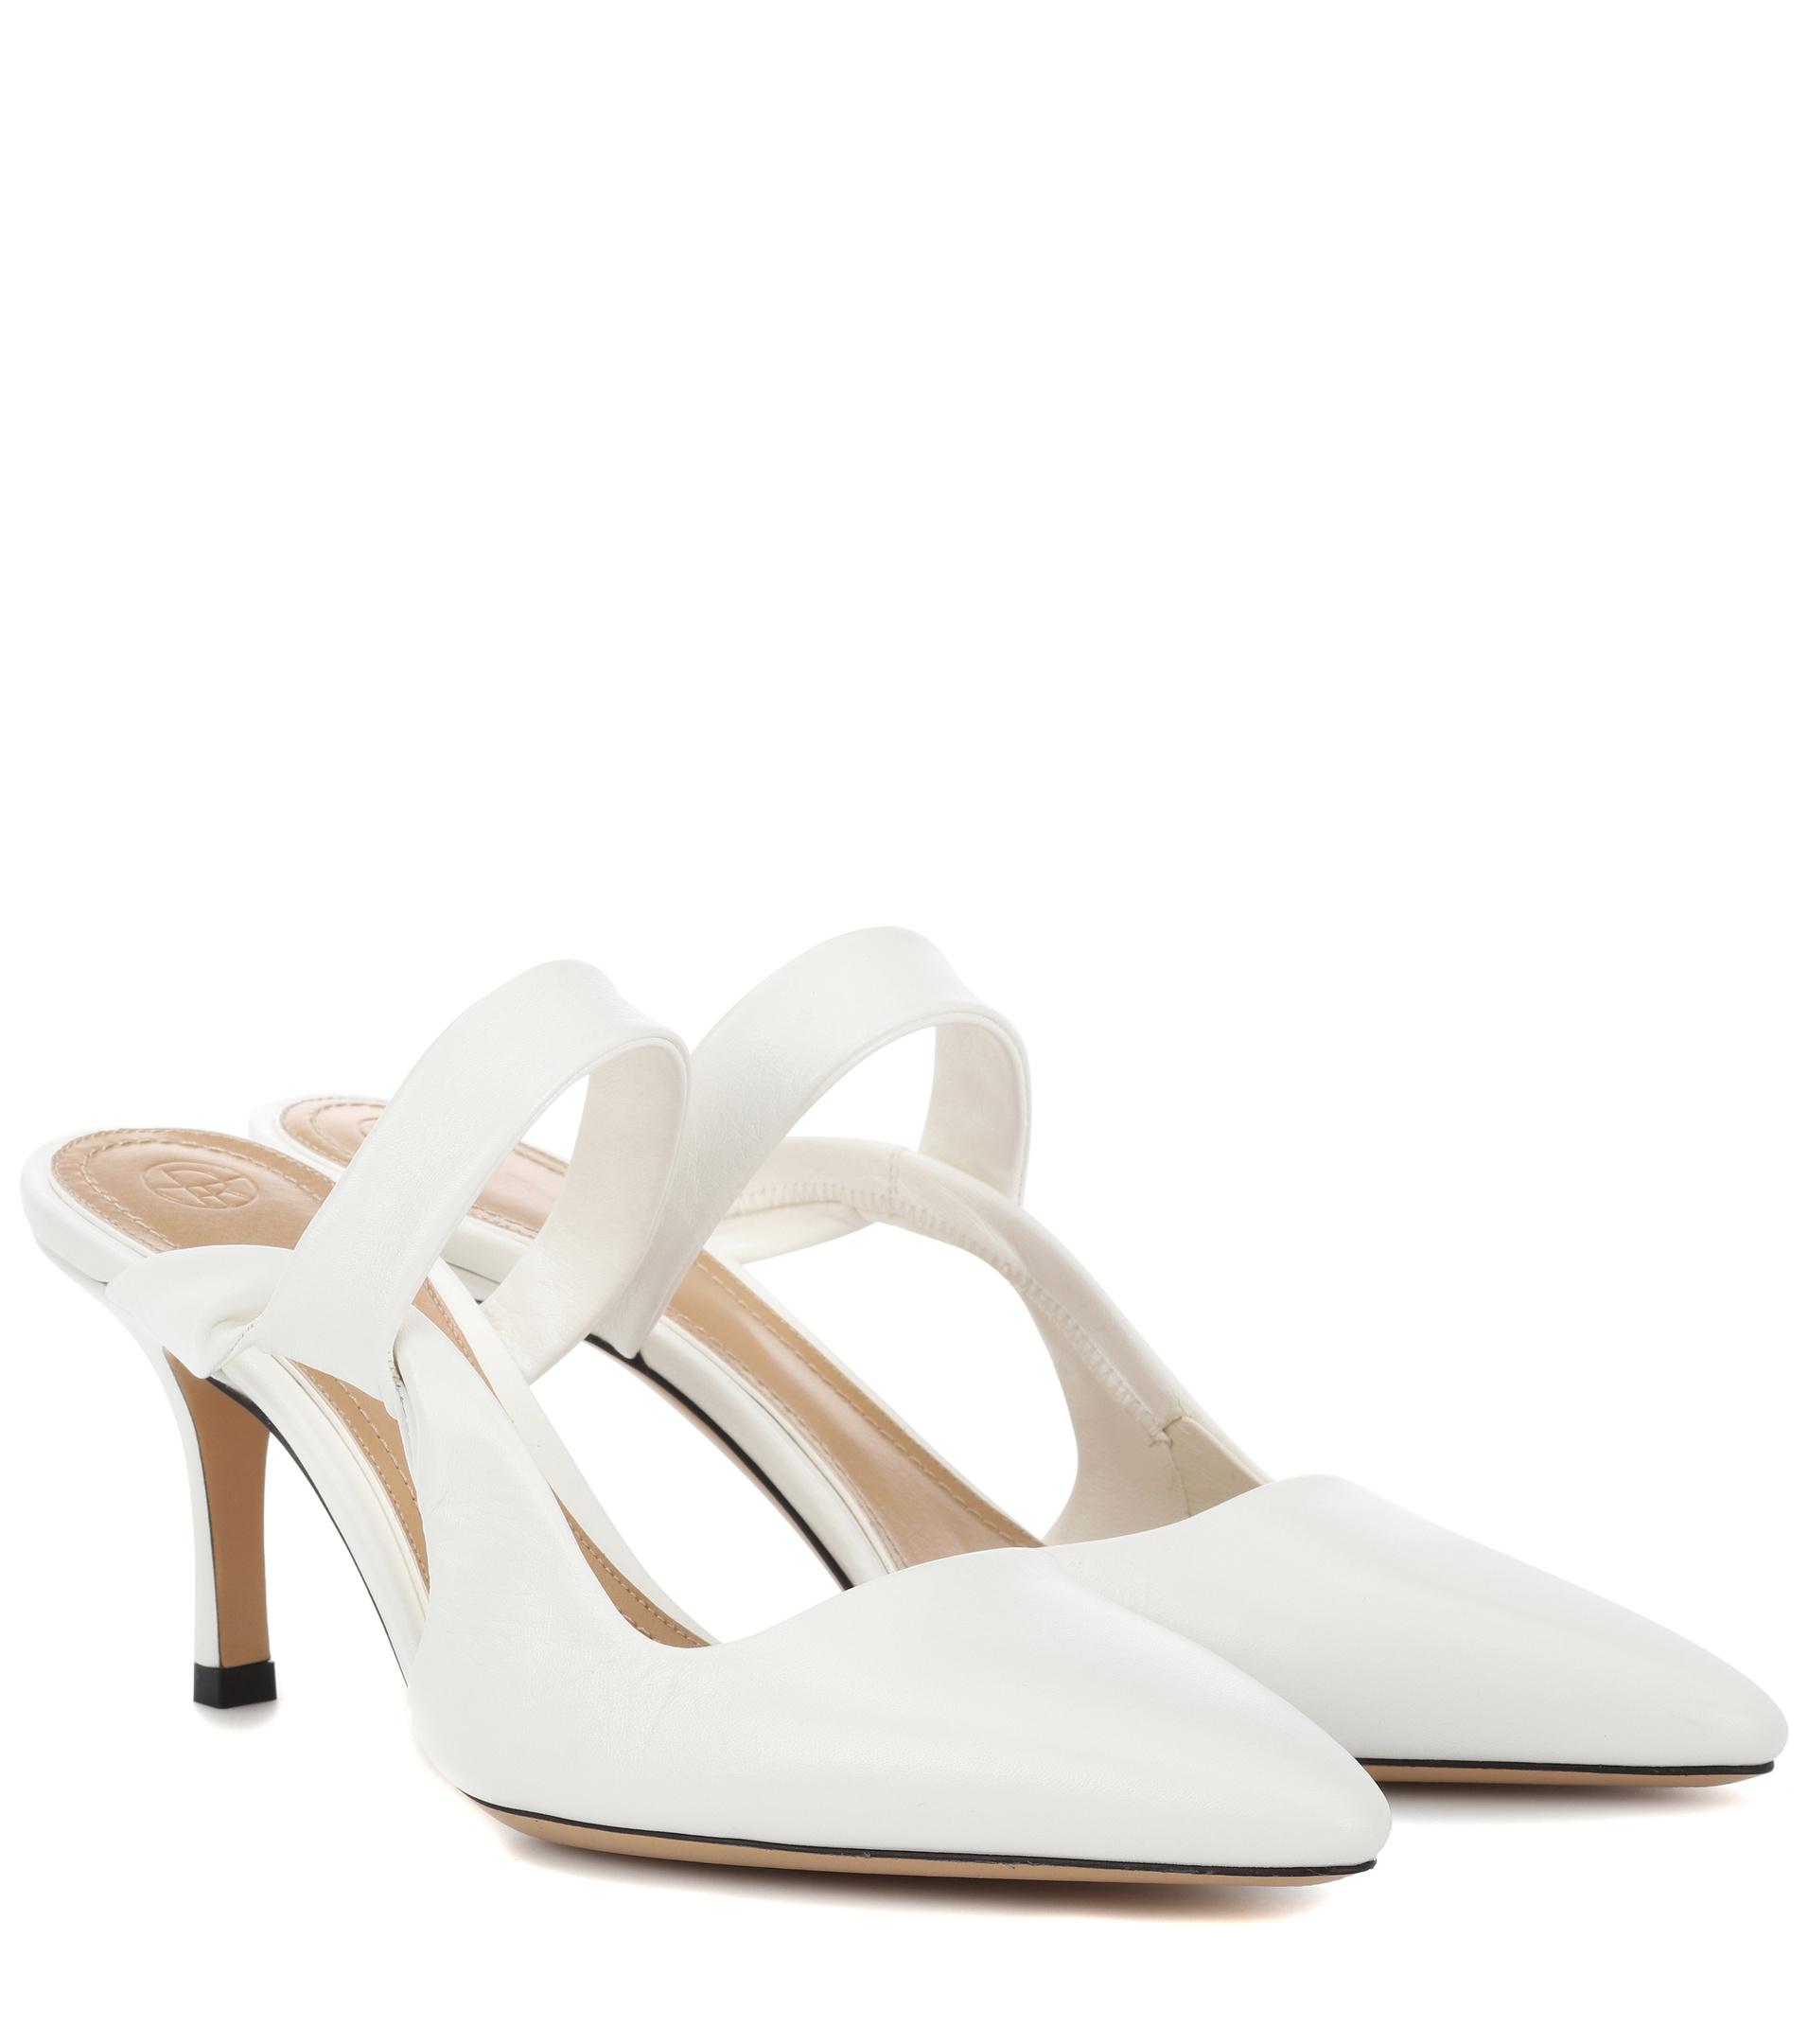 The Row Gala Twist Leather Mules in White - Lyst